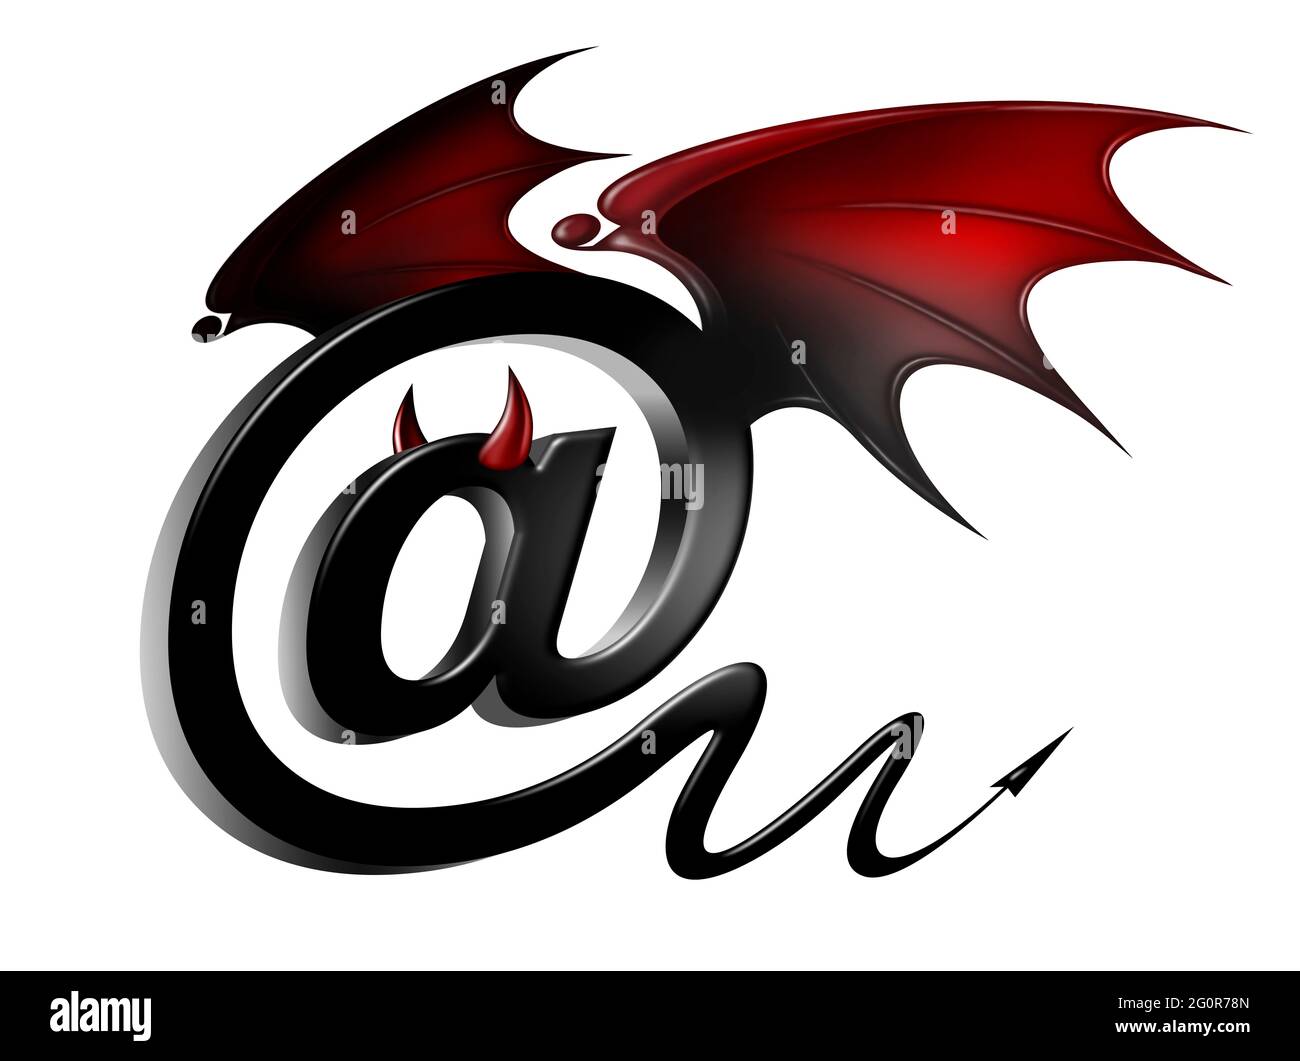 'at' symbol, email icon with diabolical elements, as a symbol of the threat of viruses and hackers Stock Photo